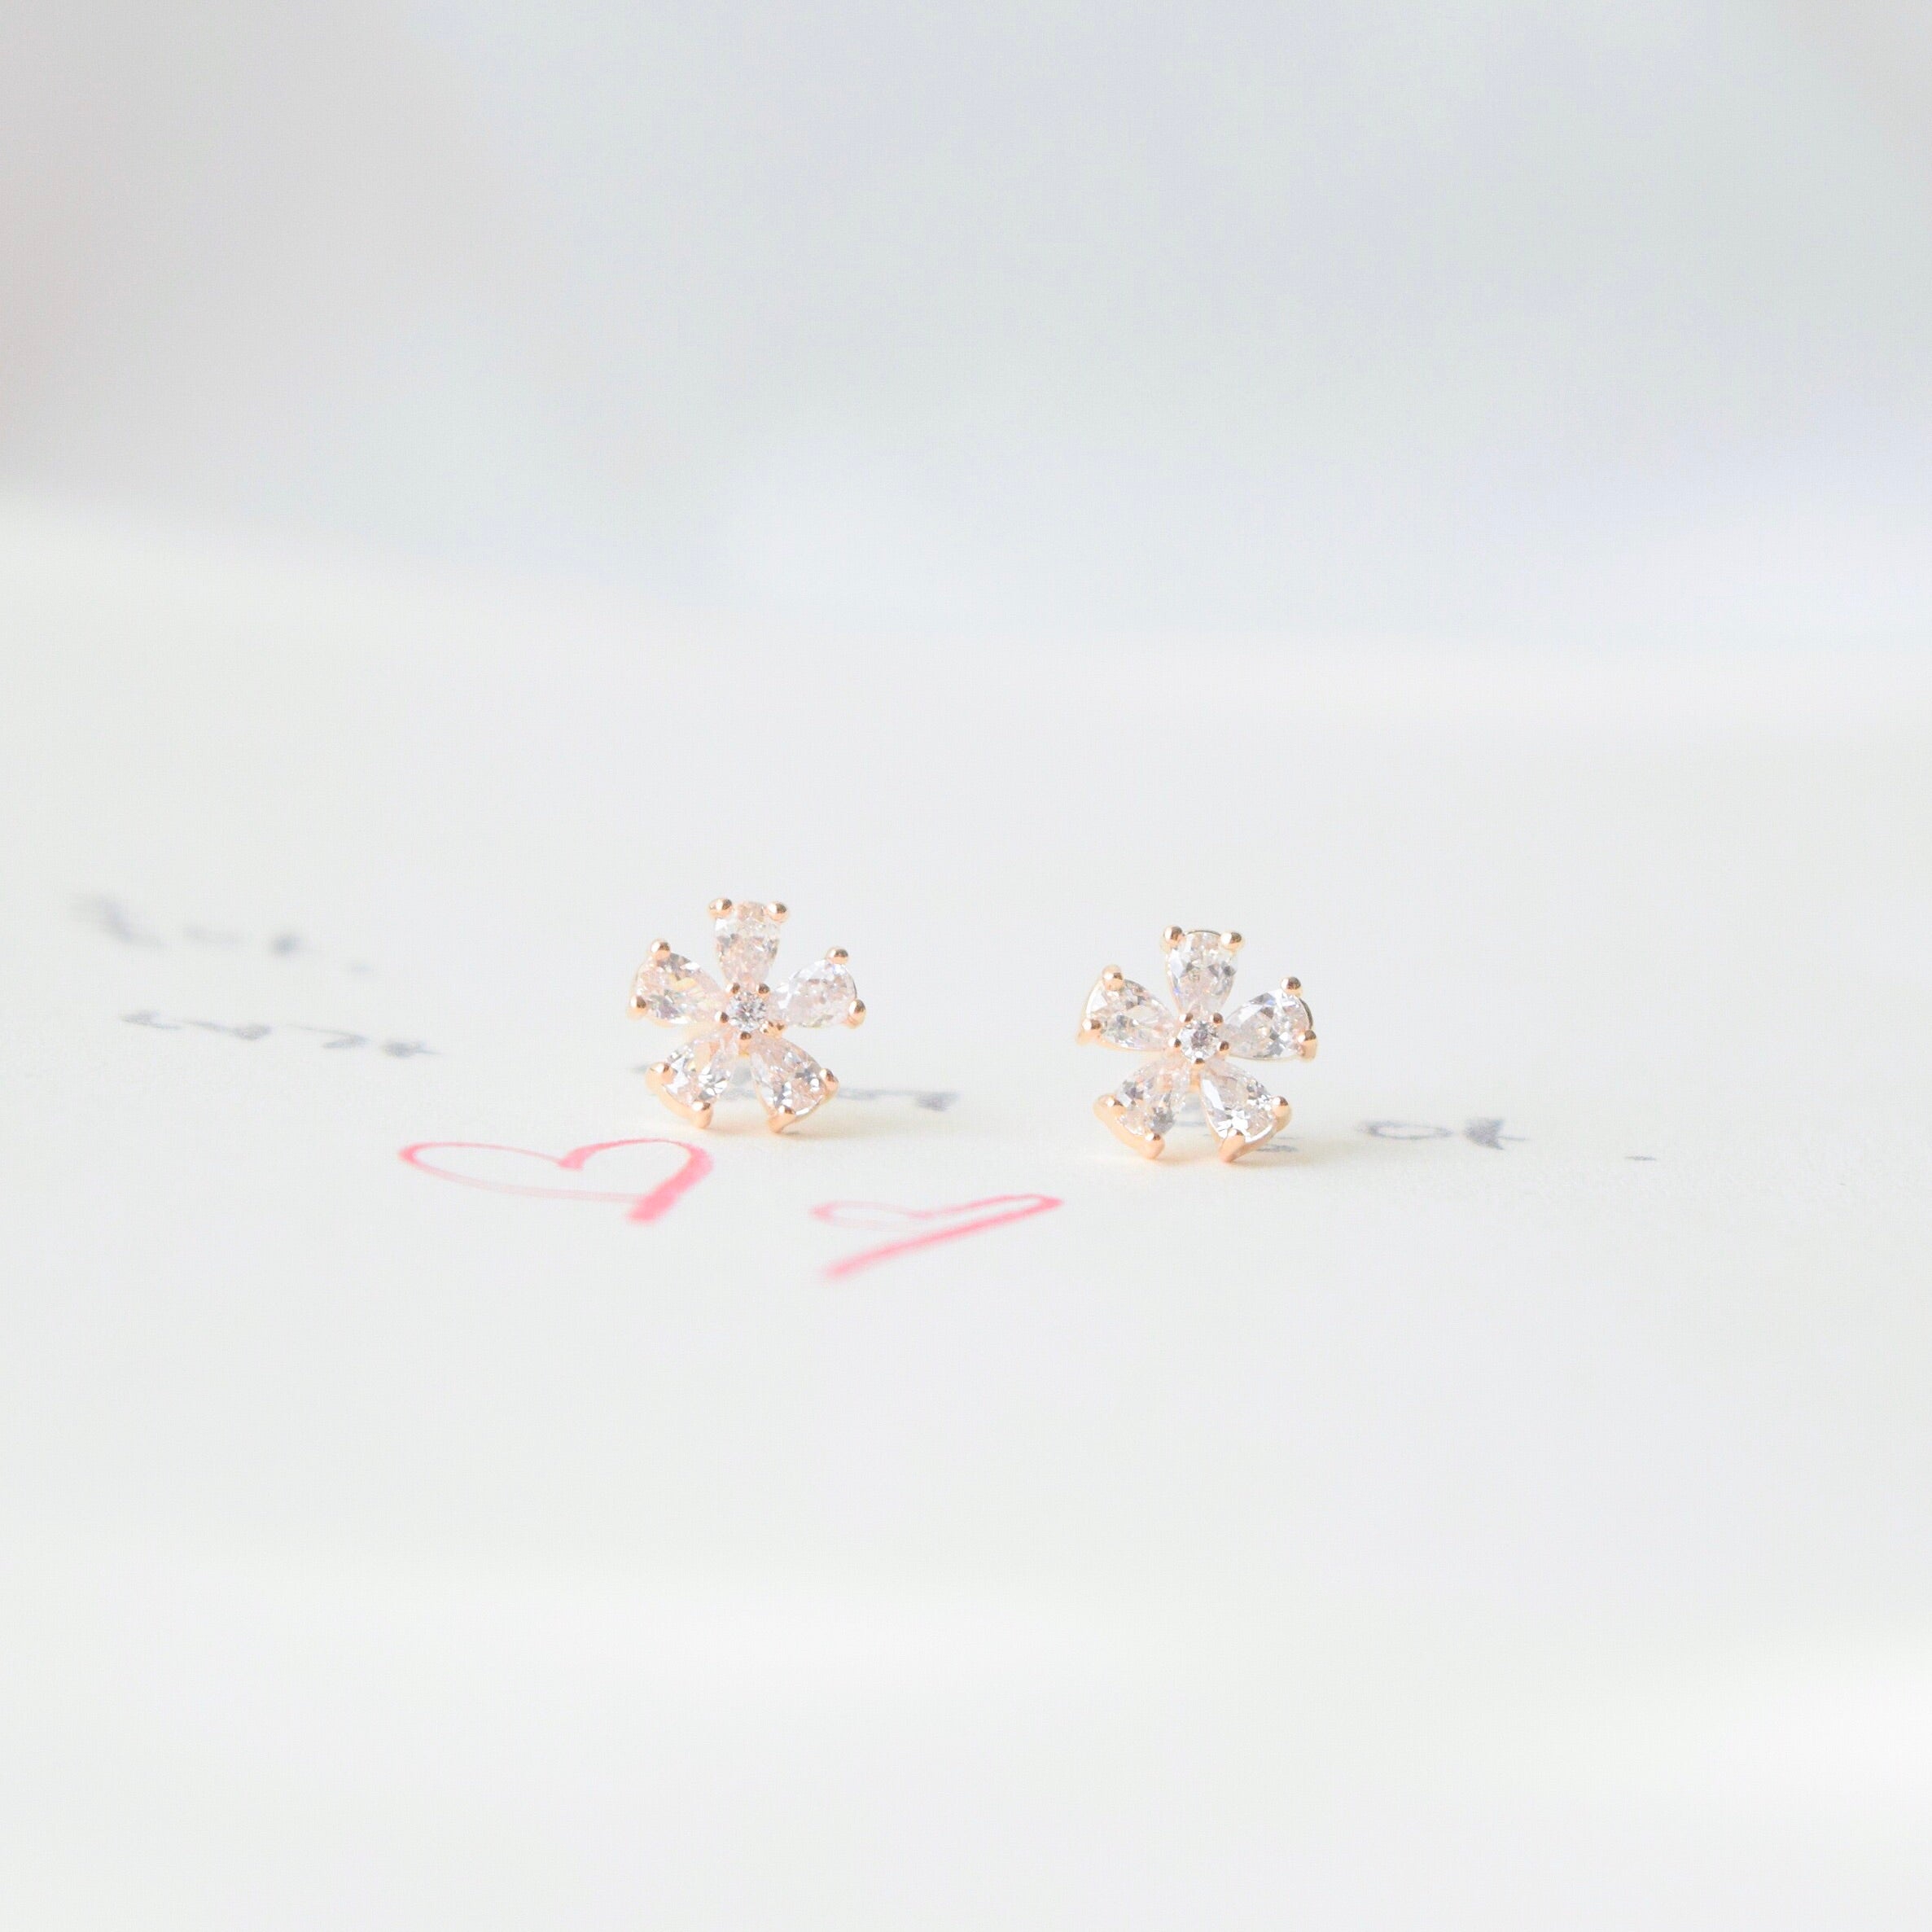 Made in Korea Earrings Korean Anting Cubic Zirconia Bride Bridal Dinner 925 Sterling Silver Accessory Fashion Fancy Stylish Costume Jewellery Online Malaysia Shopping Trendy Accessories Daily Wear Jewelry Dainty Minimalist Delicate Clip On Earrings No Piercing Special Perfect Gift From Heart For Your Loved One 